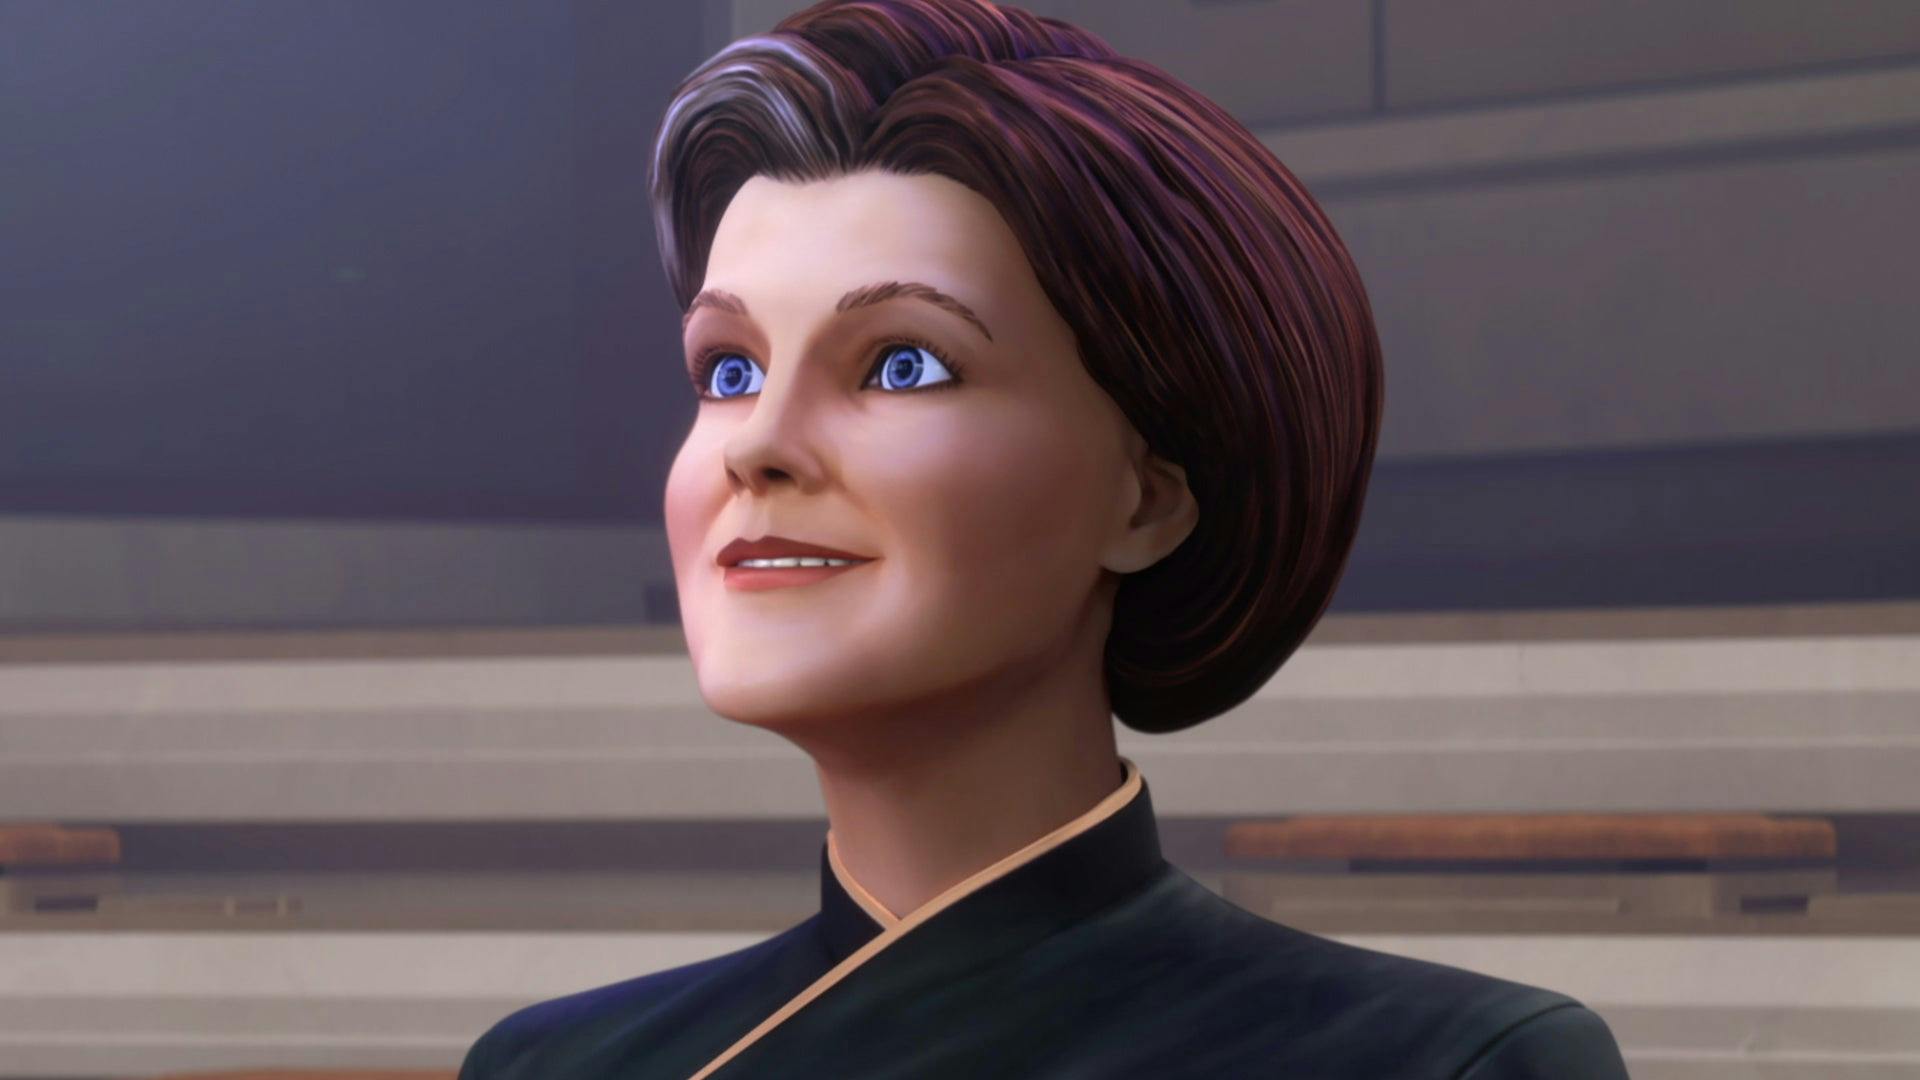 Holo-Janeway looks up and to the right with a smile on her face - Star Trek: Prodigy